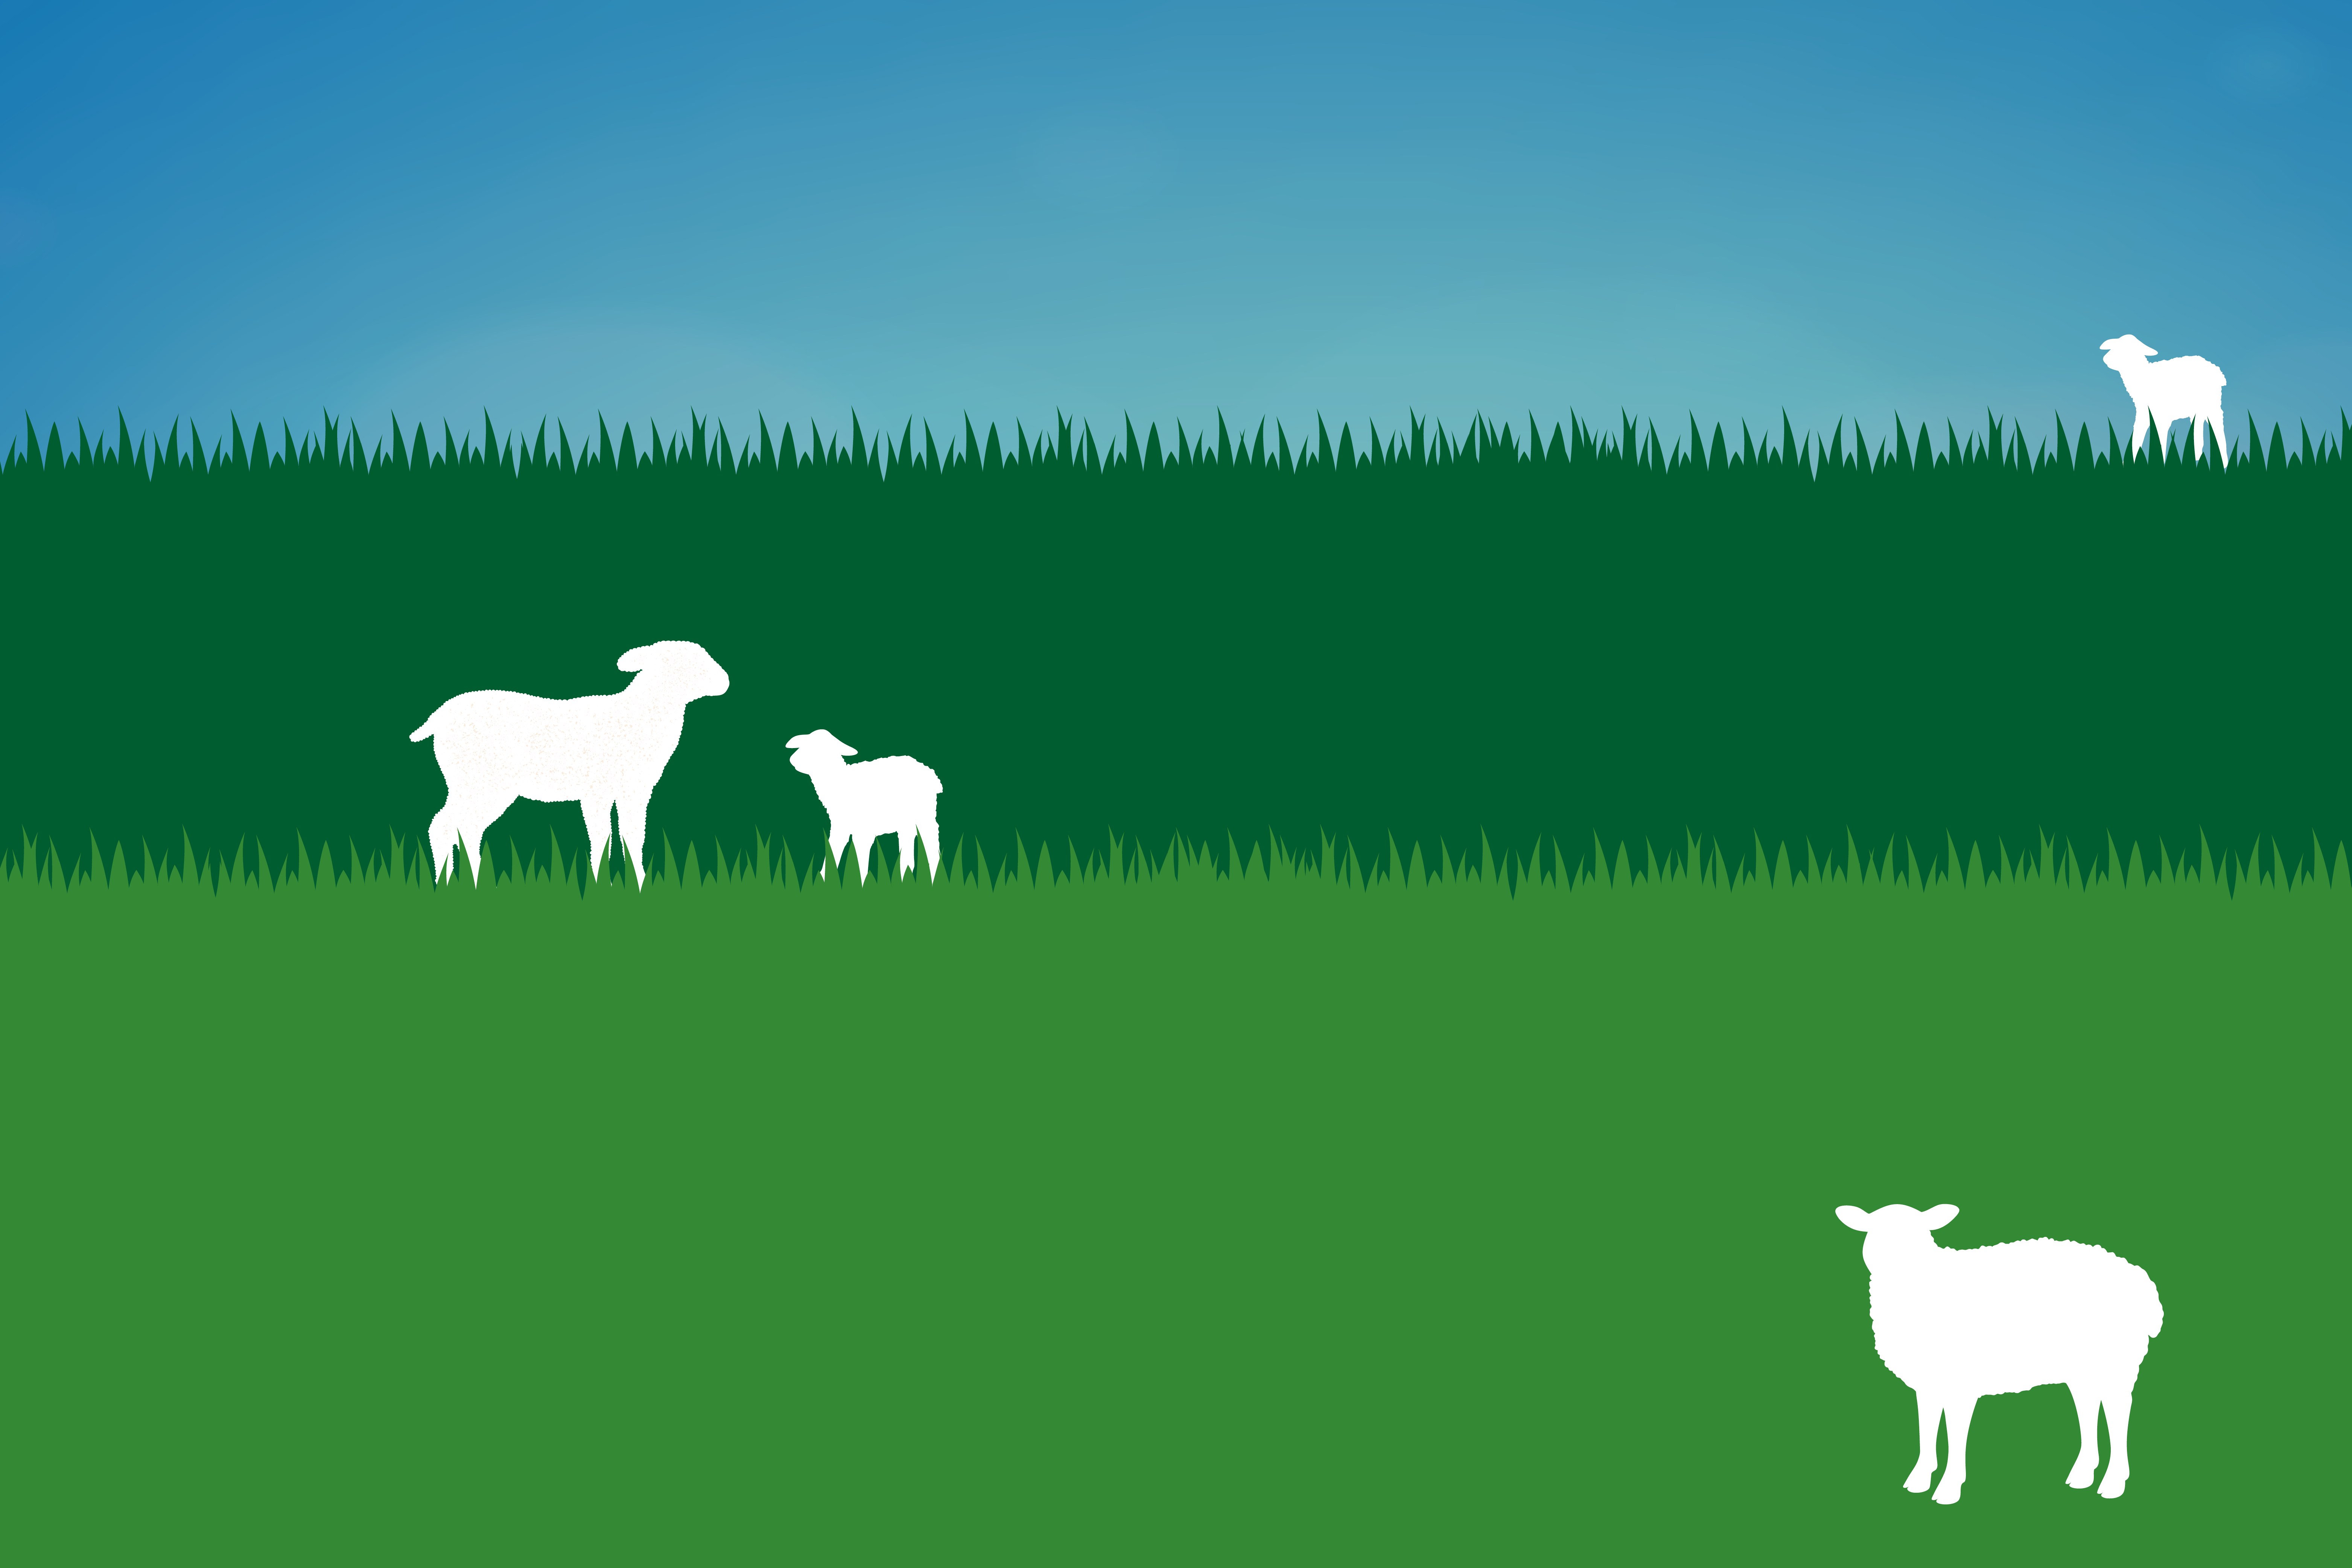 Hadlow Branded background for Lambing Weekend event